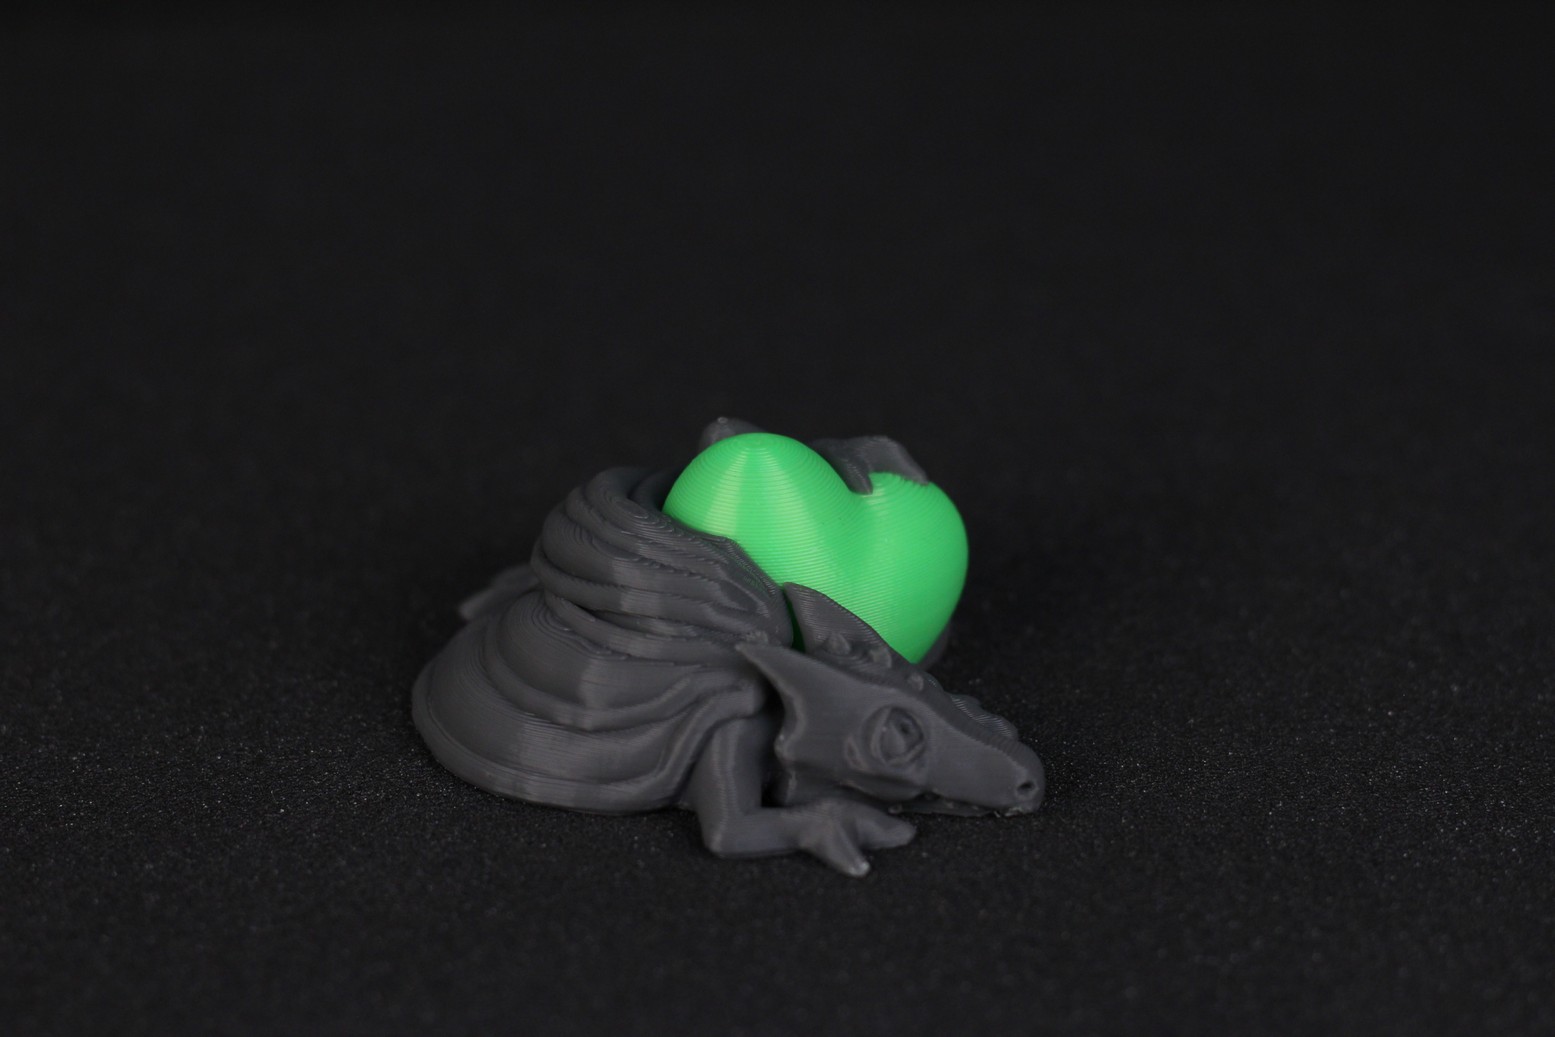 Dragon and Heart sample print for SC 10 Shark 1 | LOTMAXX SC-10 Shark V2 Review: Dual Color Printing and Laser Engraving